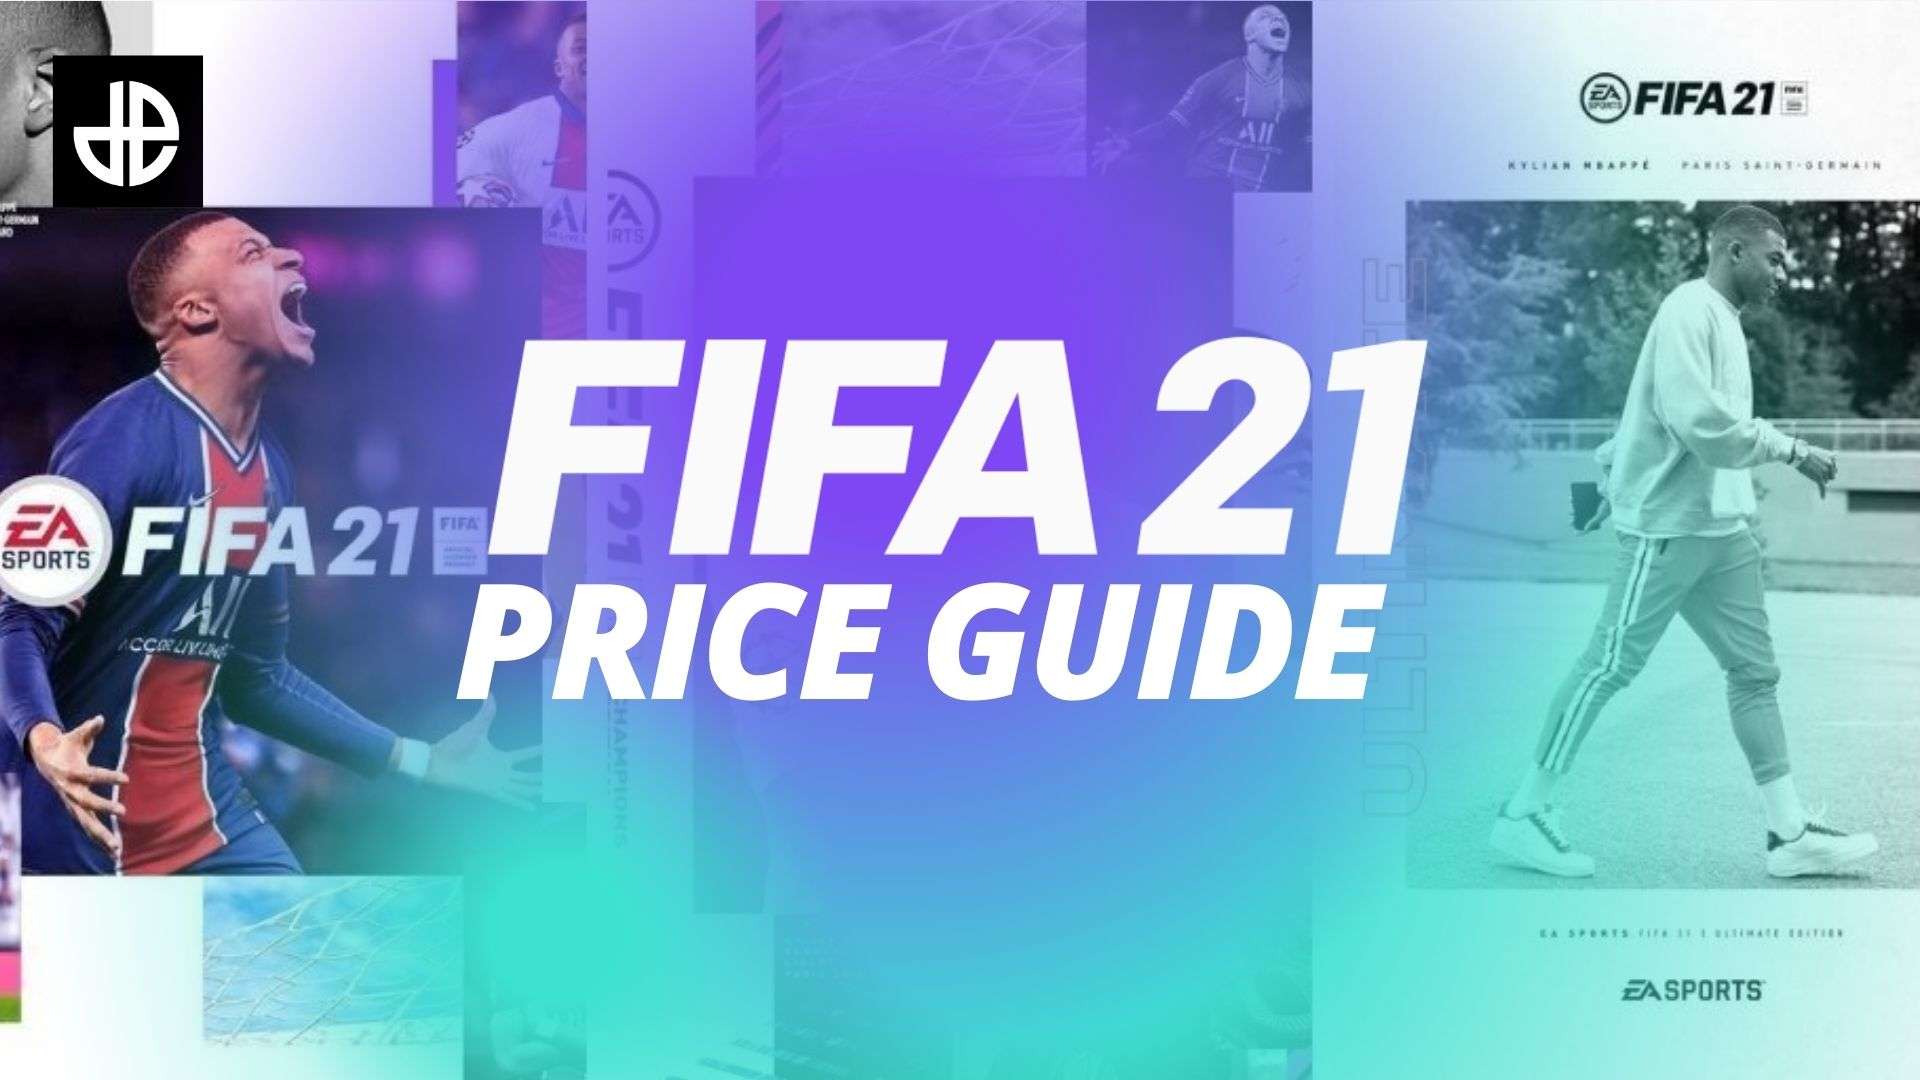 Price guide image for fifa 21